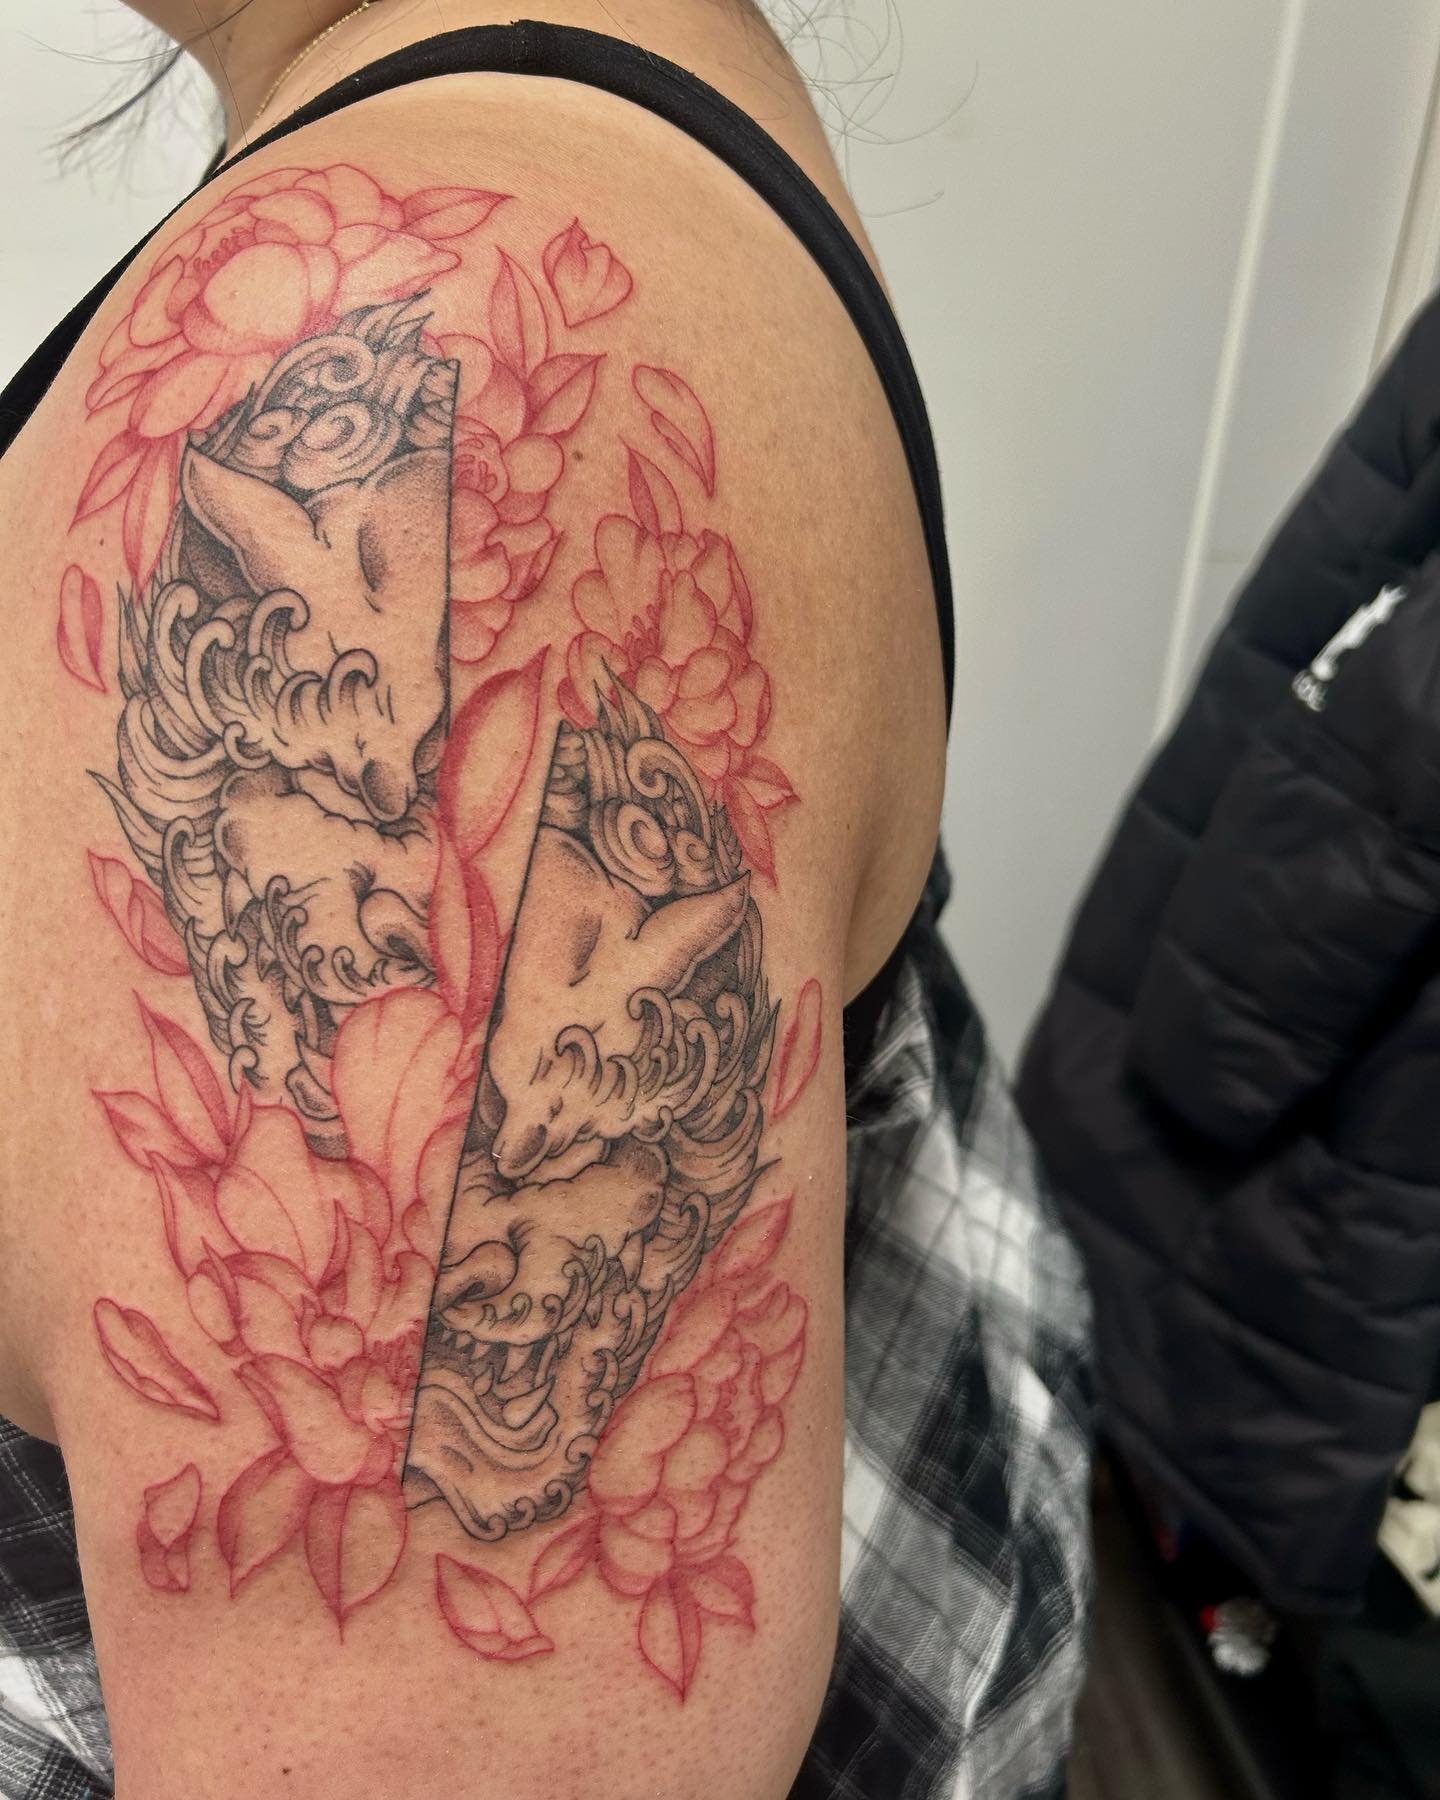 F L O R A L  F U  D O G

(freshly done vs. three months healed)

THANK YOU for letting me do something like this jay, despite not haven&rsquo;t done many oriental inspired pieces.